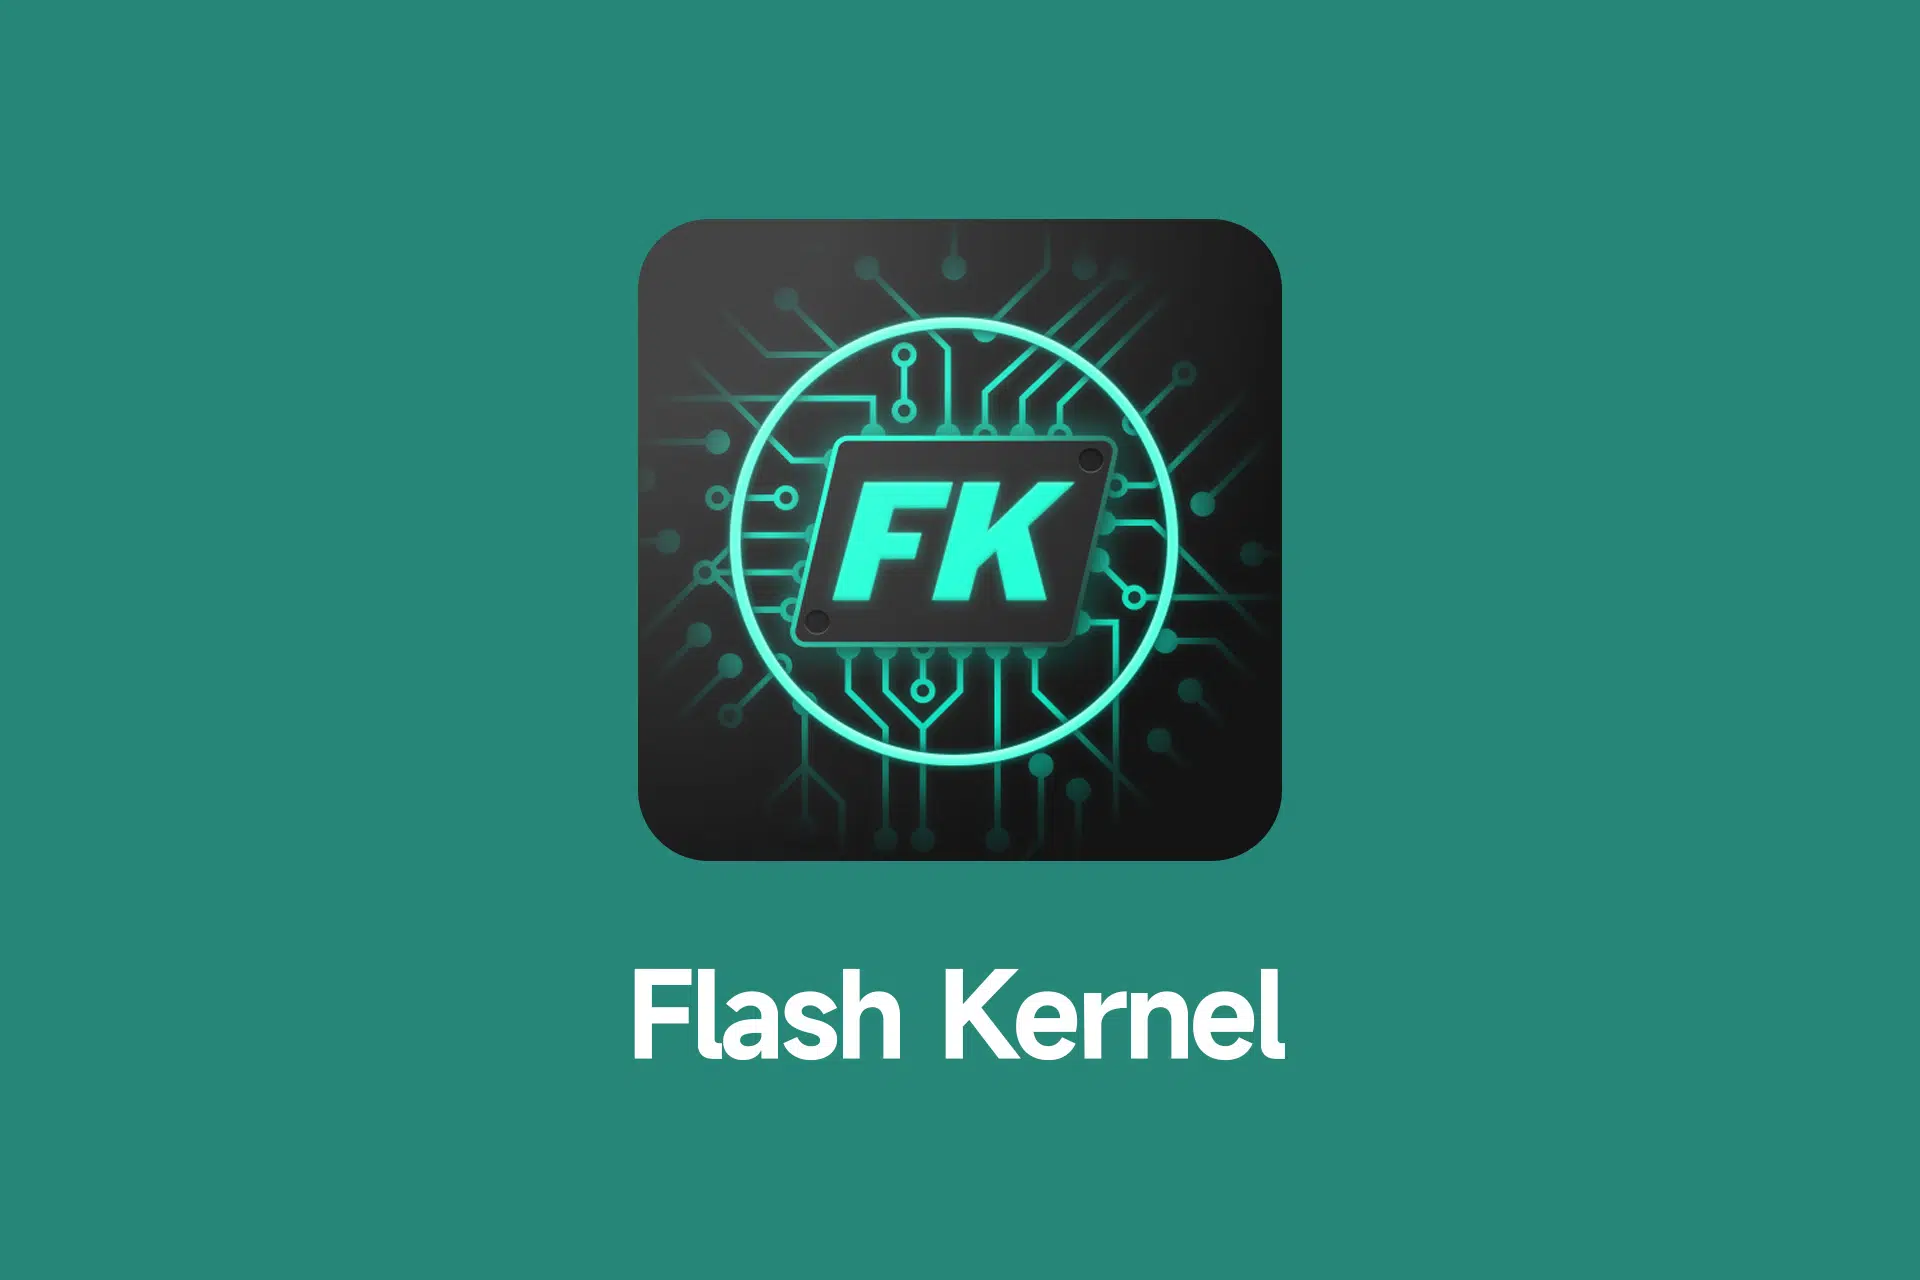 How to flash Android Kernel?